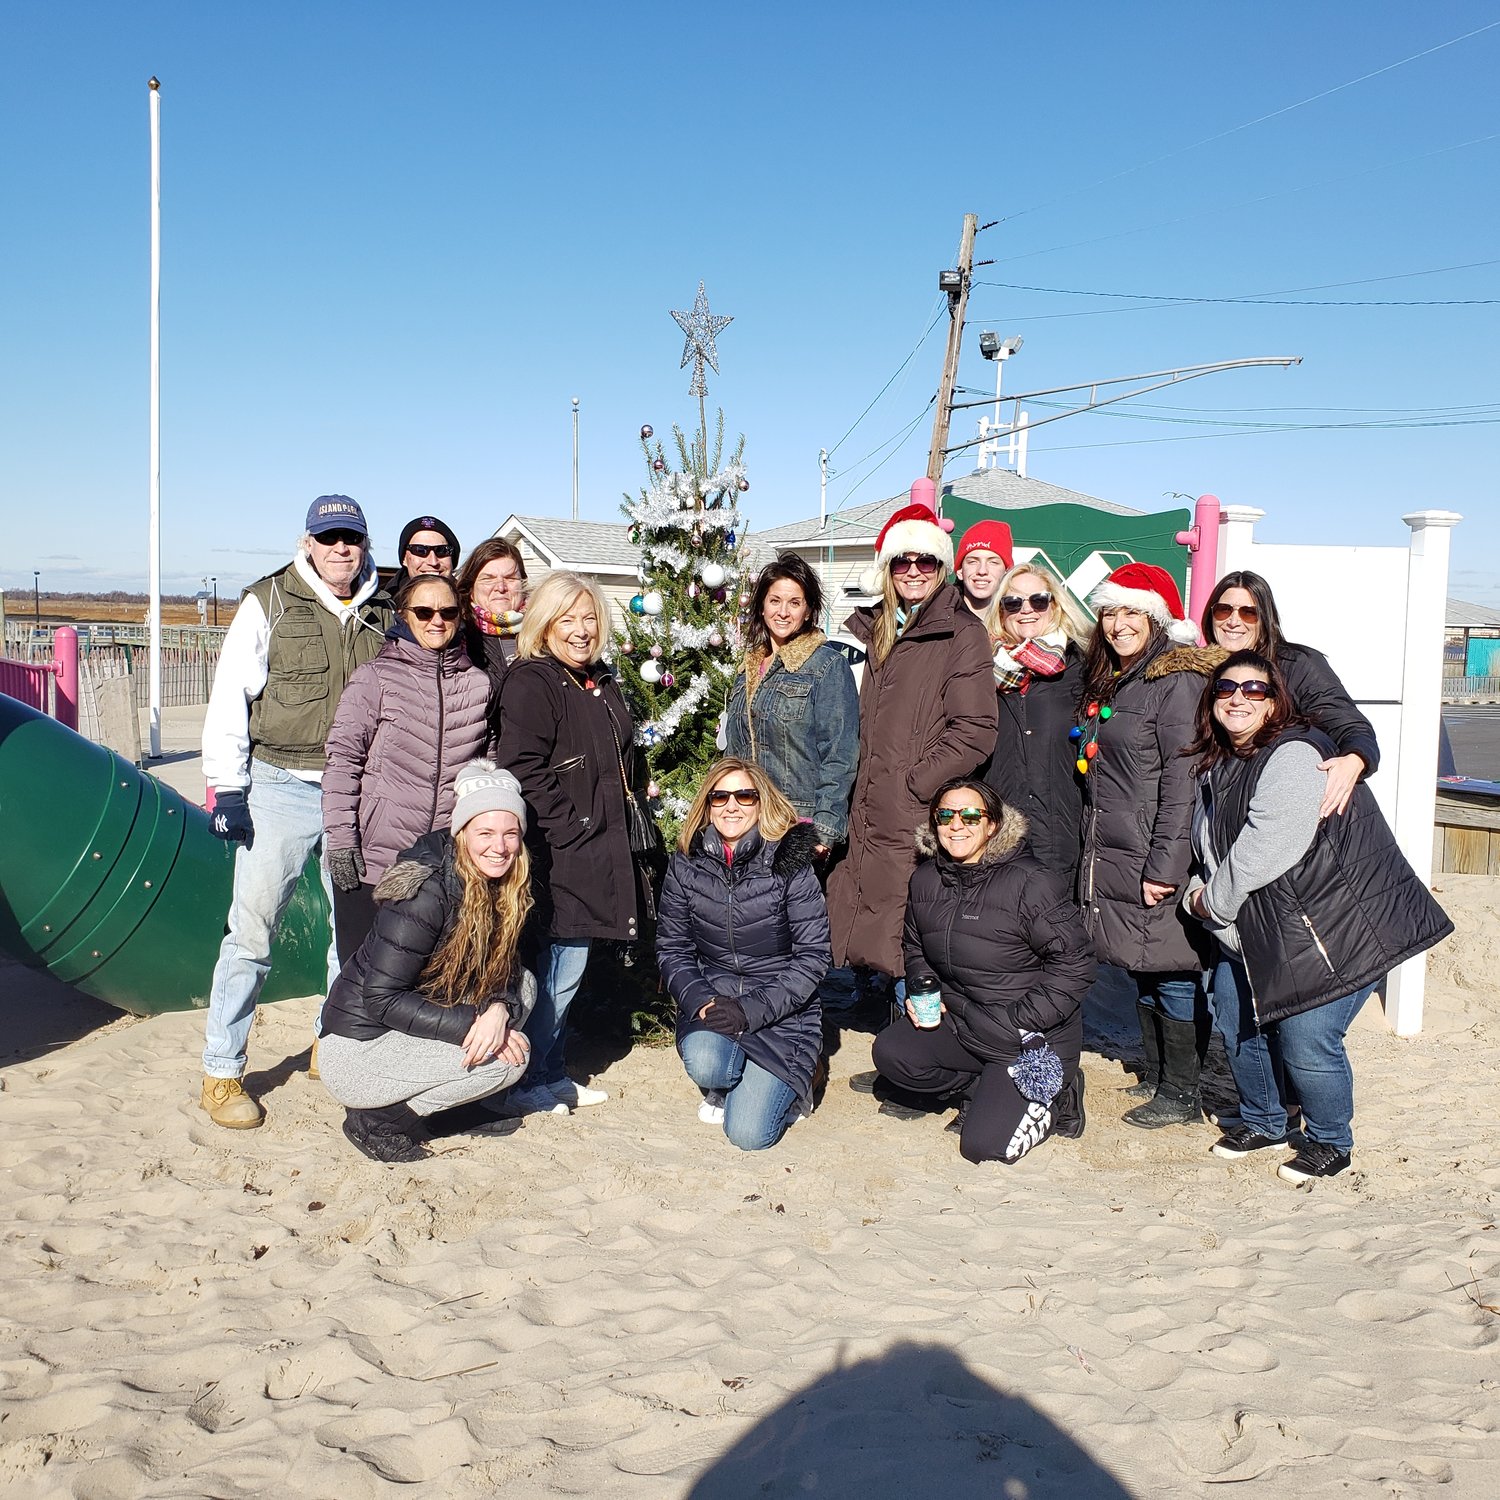 Dozens of community members came to Masone Beach on Saturday to honor Caroline Previdi, who was one of the victims in the Sandy Hook Elementary School shooting, and whom the playground at the beach was dedicated to.